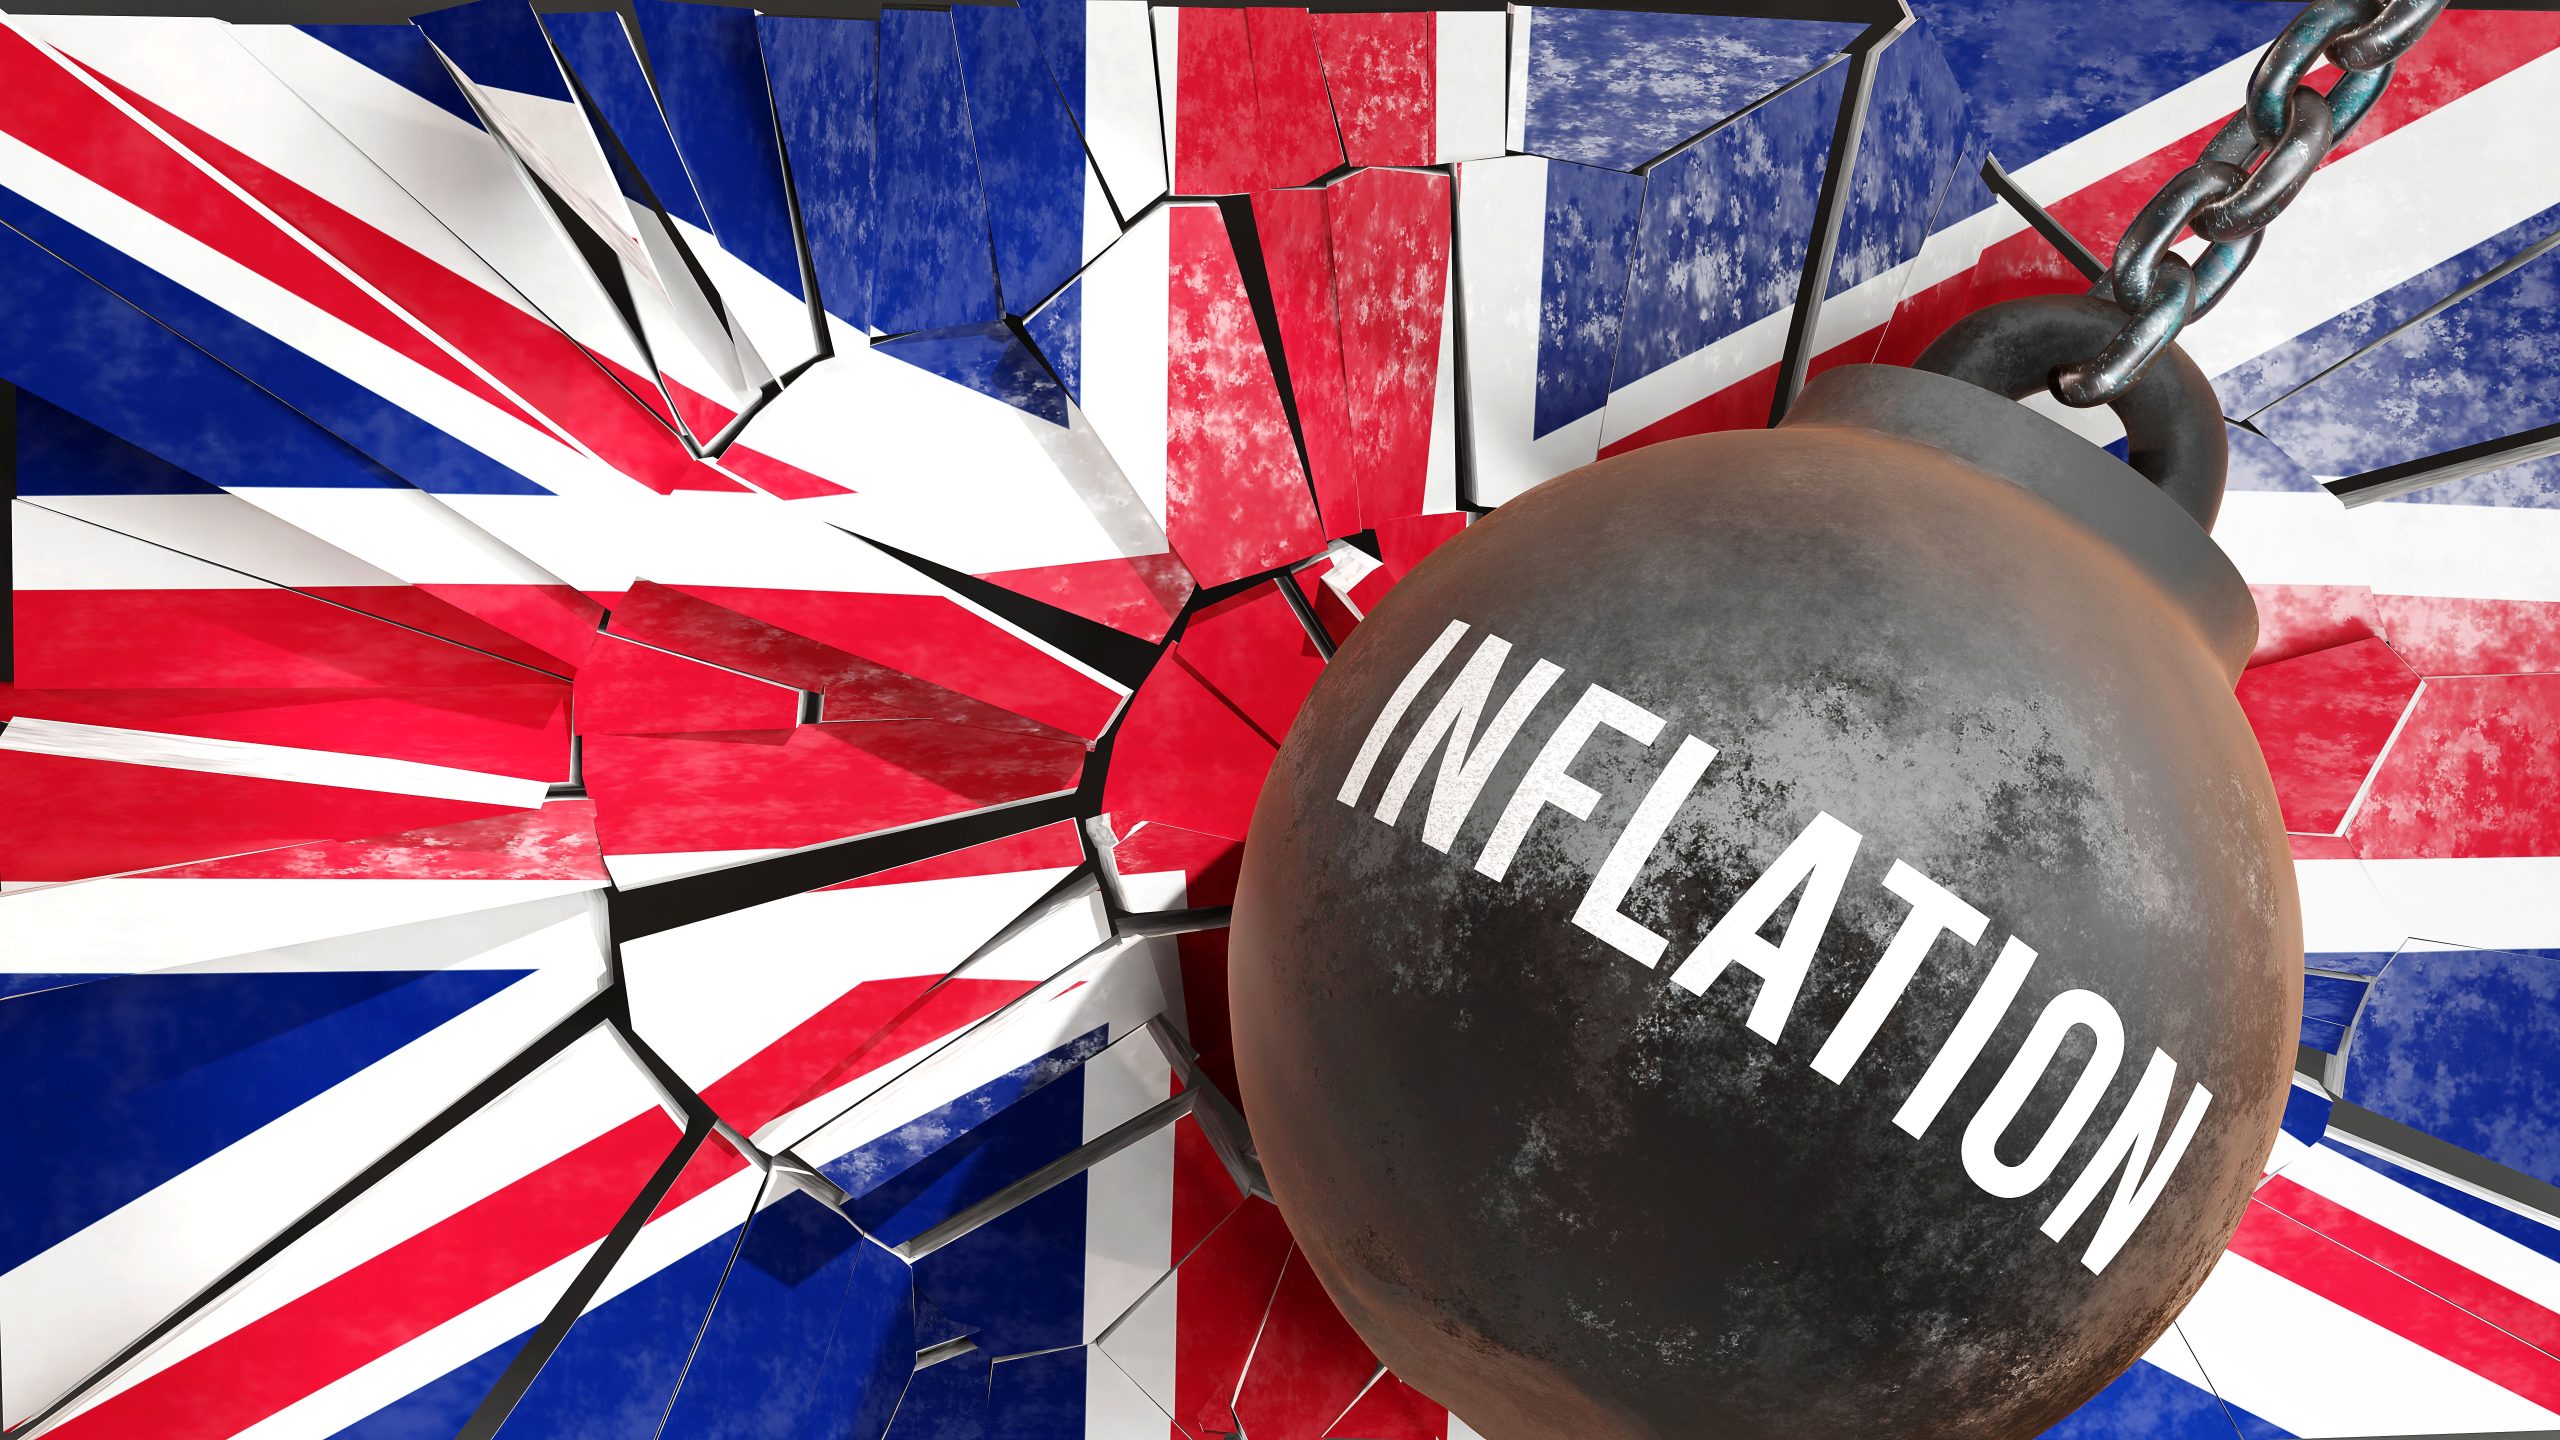 cost of living crisis, inflation in UK